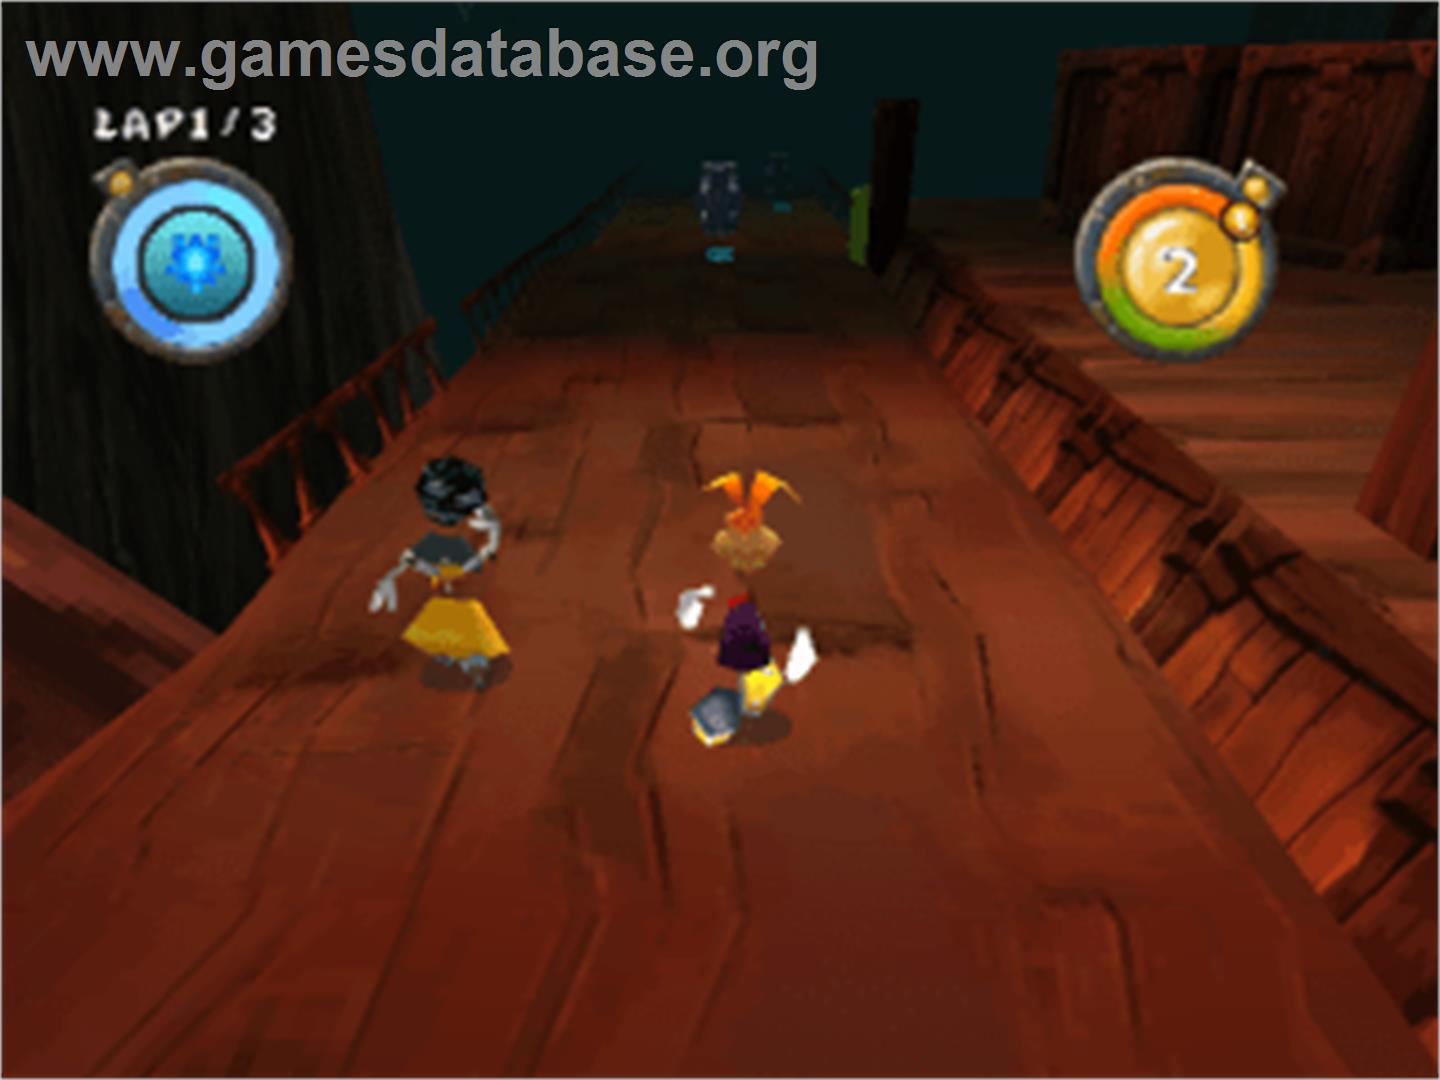 Rayman Rush - Sony Playstation - Artwork - In Game